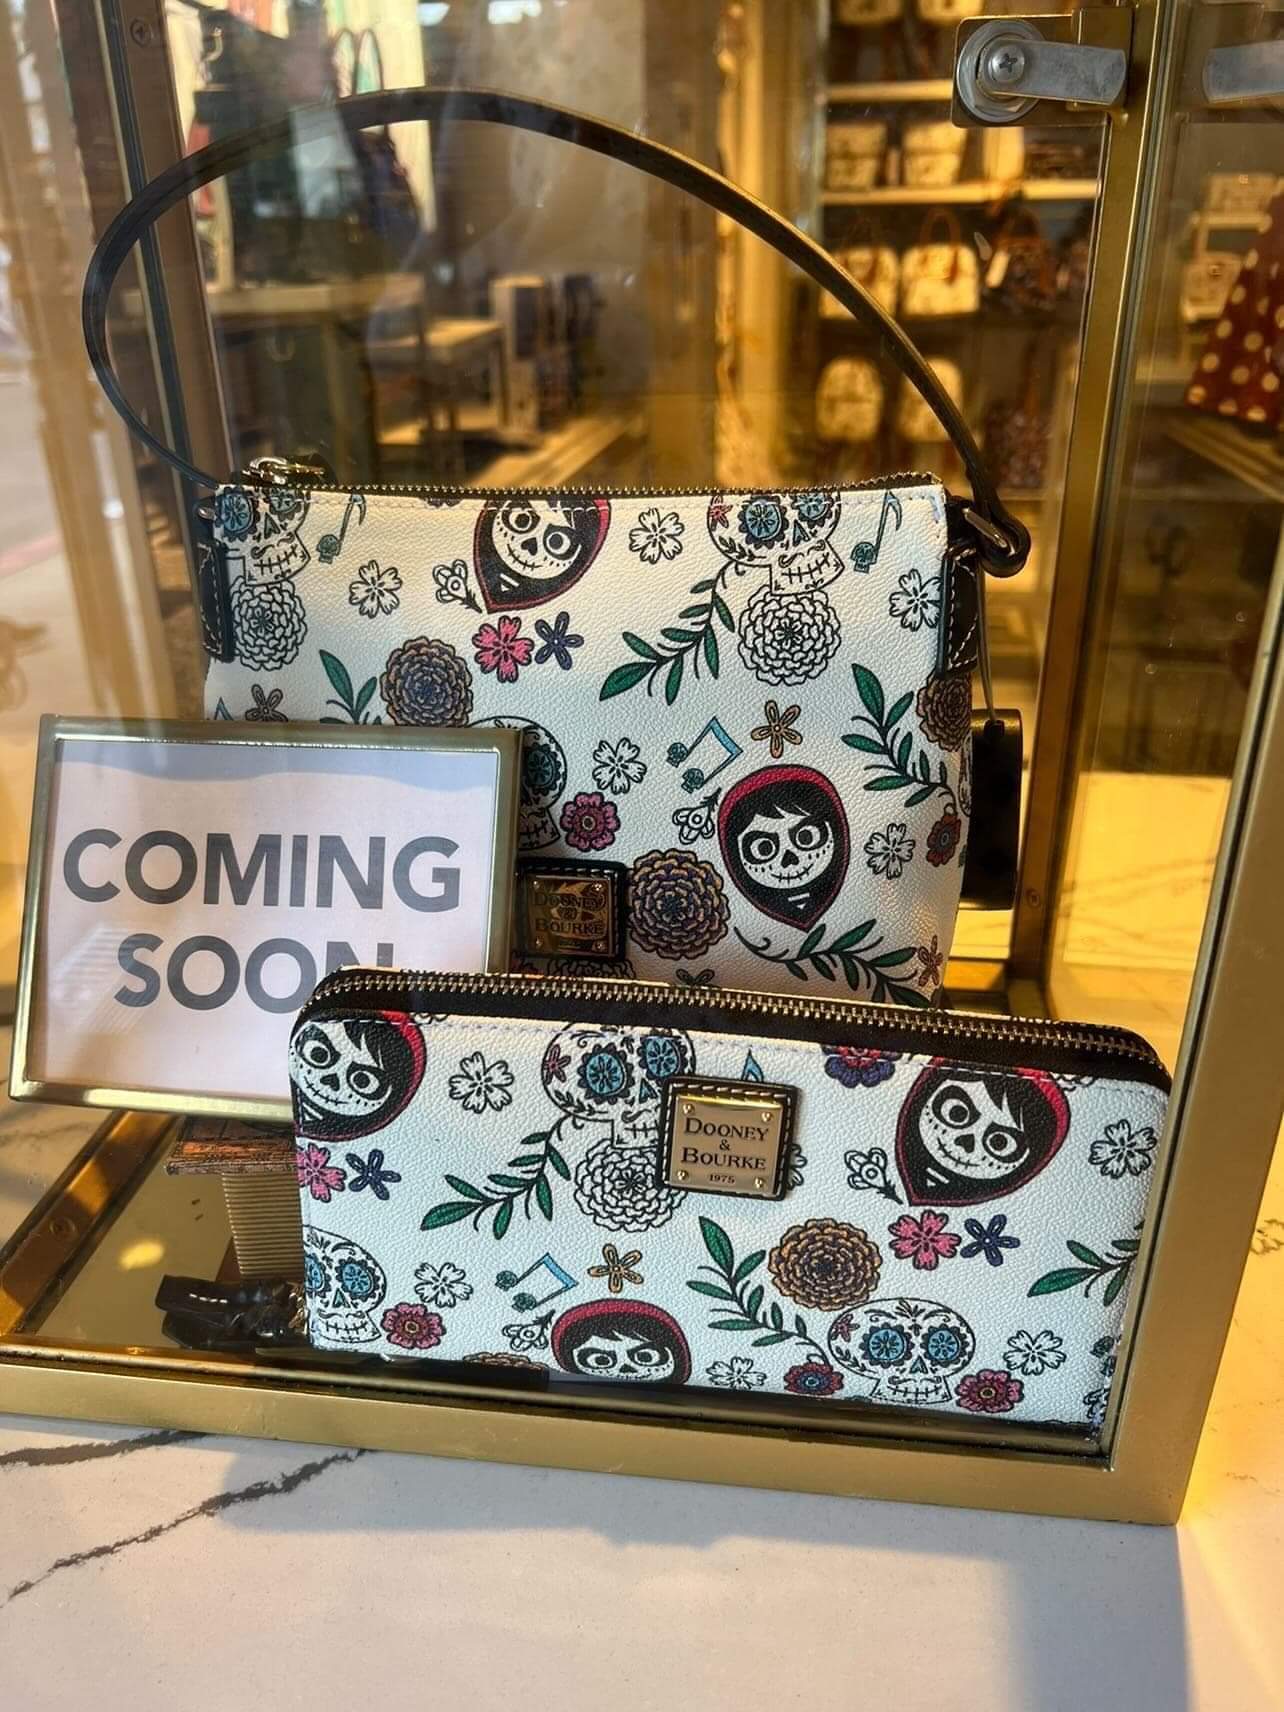 Coco Dooney & Bourke Collection Arrives Today!